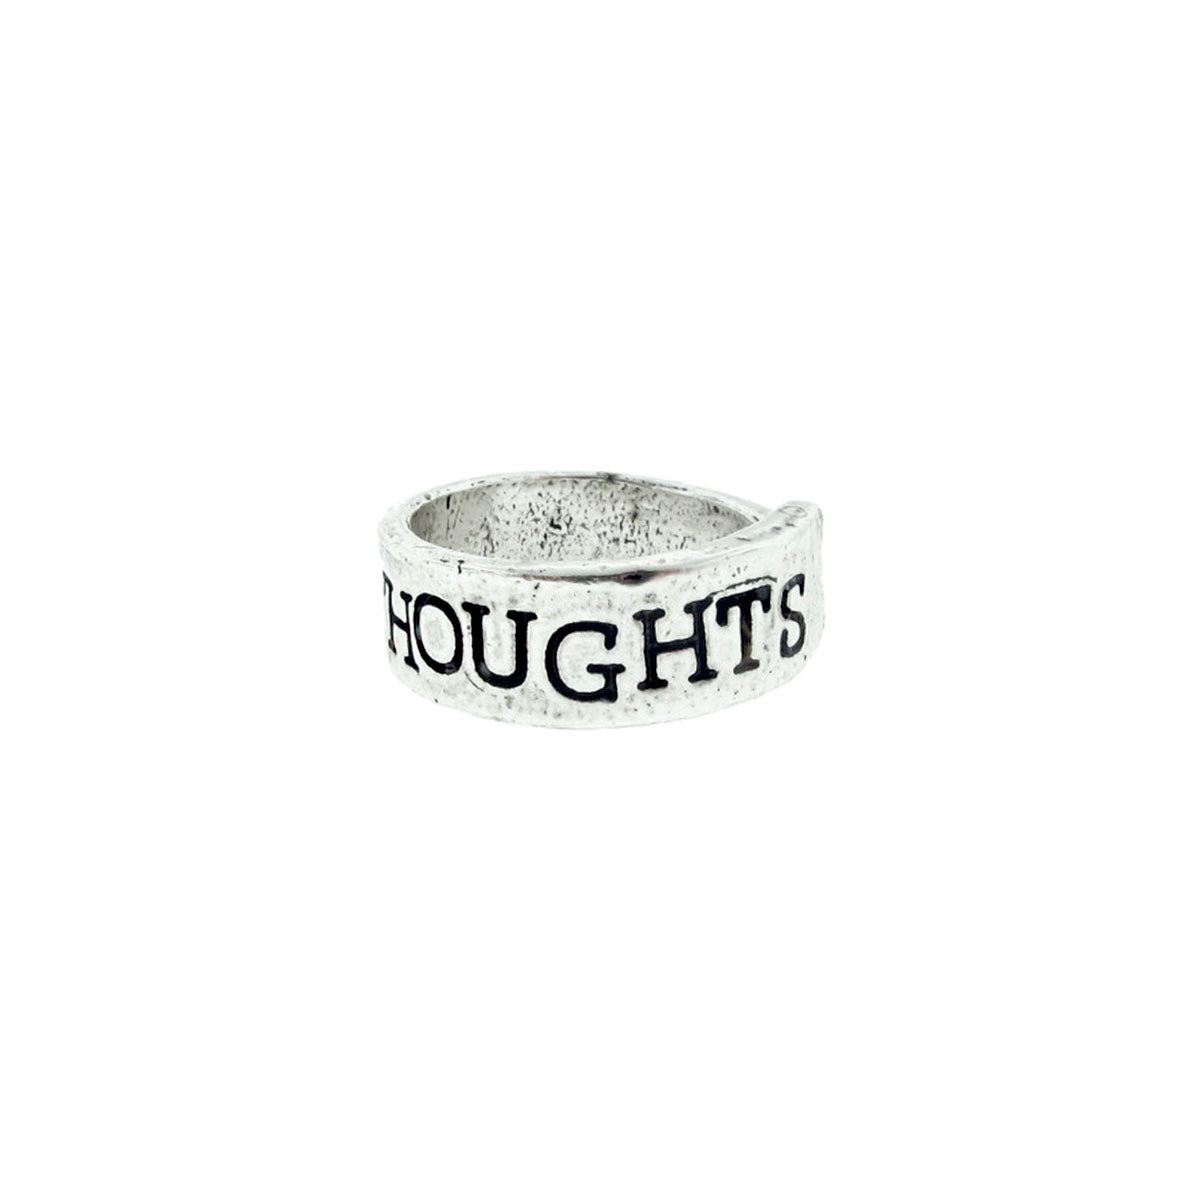 Positive Thoughts Hand Stamped Ring